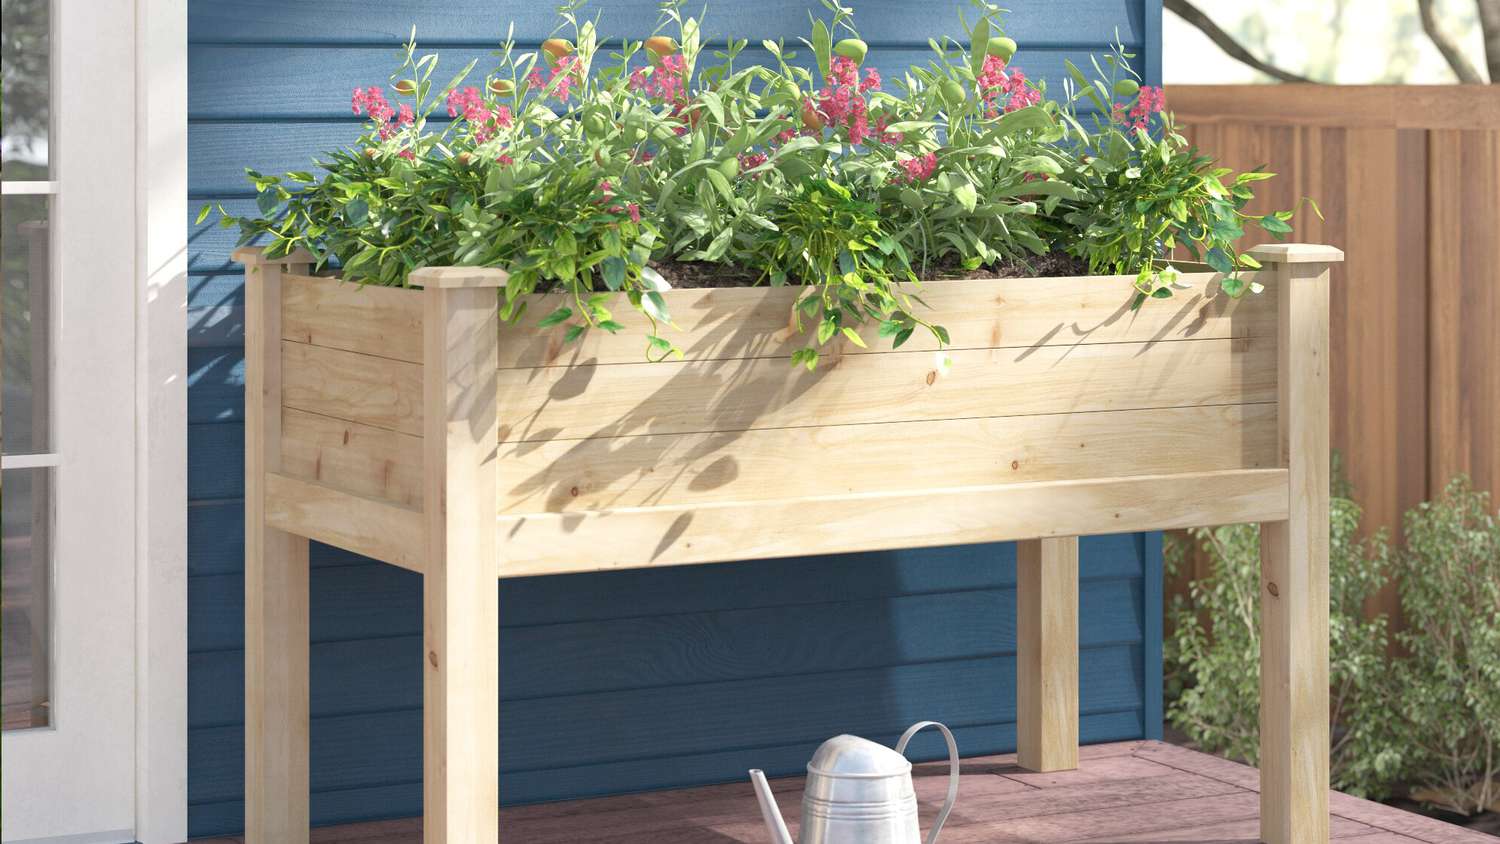 The 20 Best Raised Garden Beds in 20, According to Reviews ...